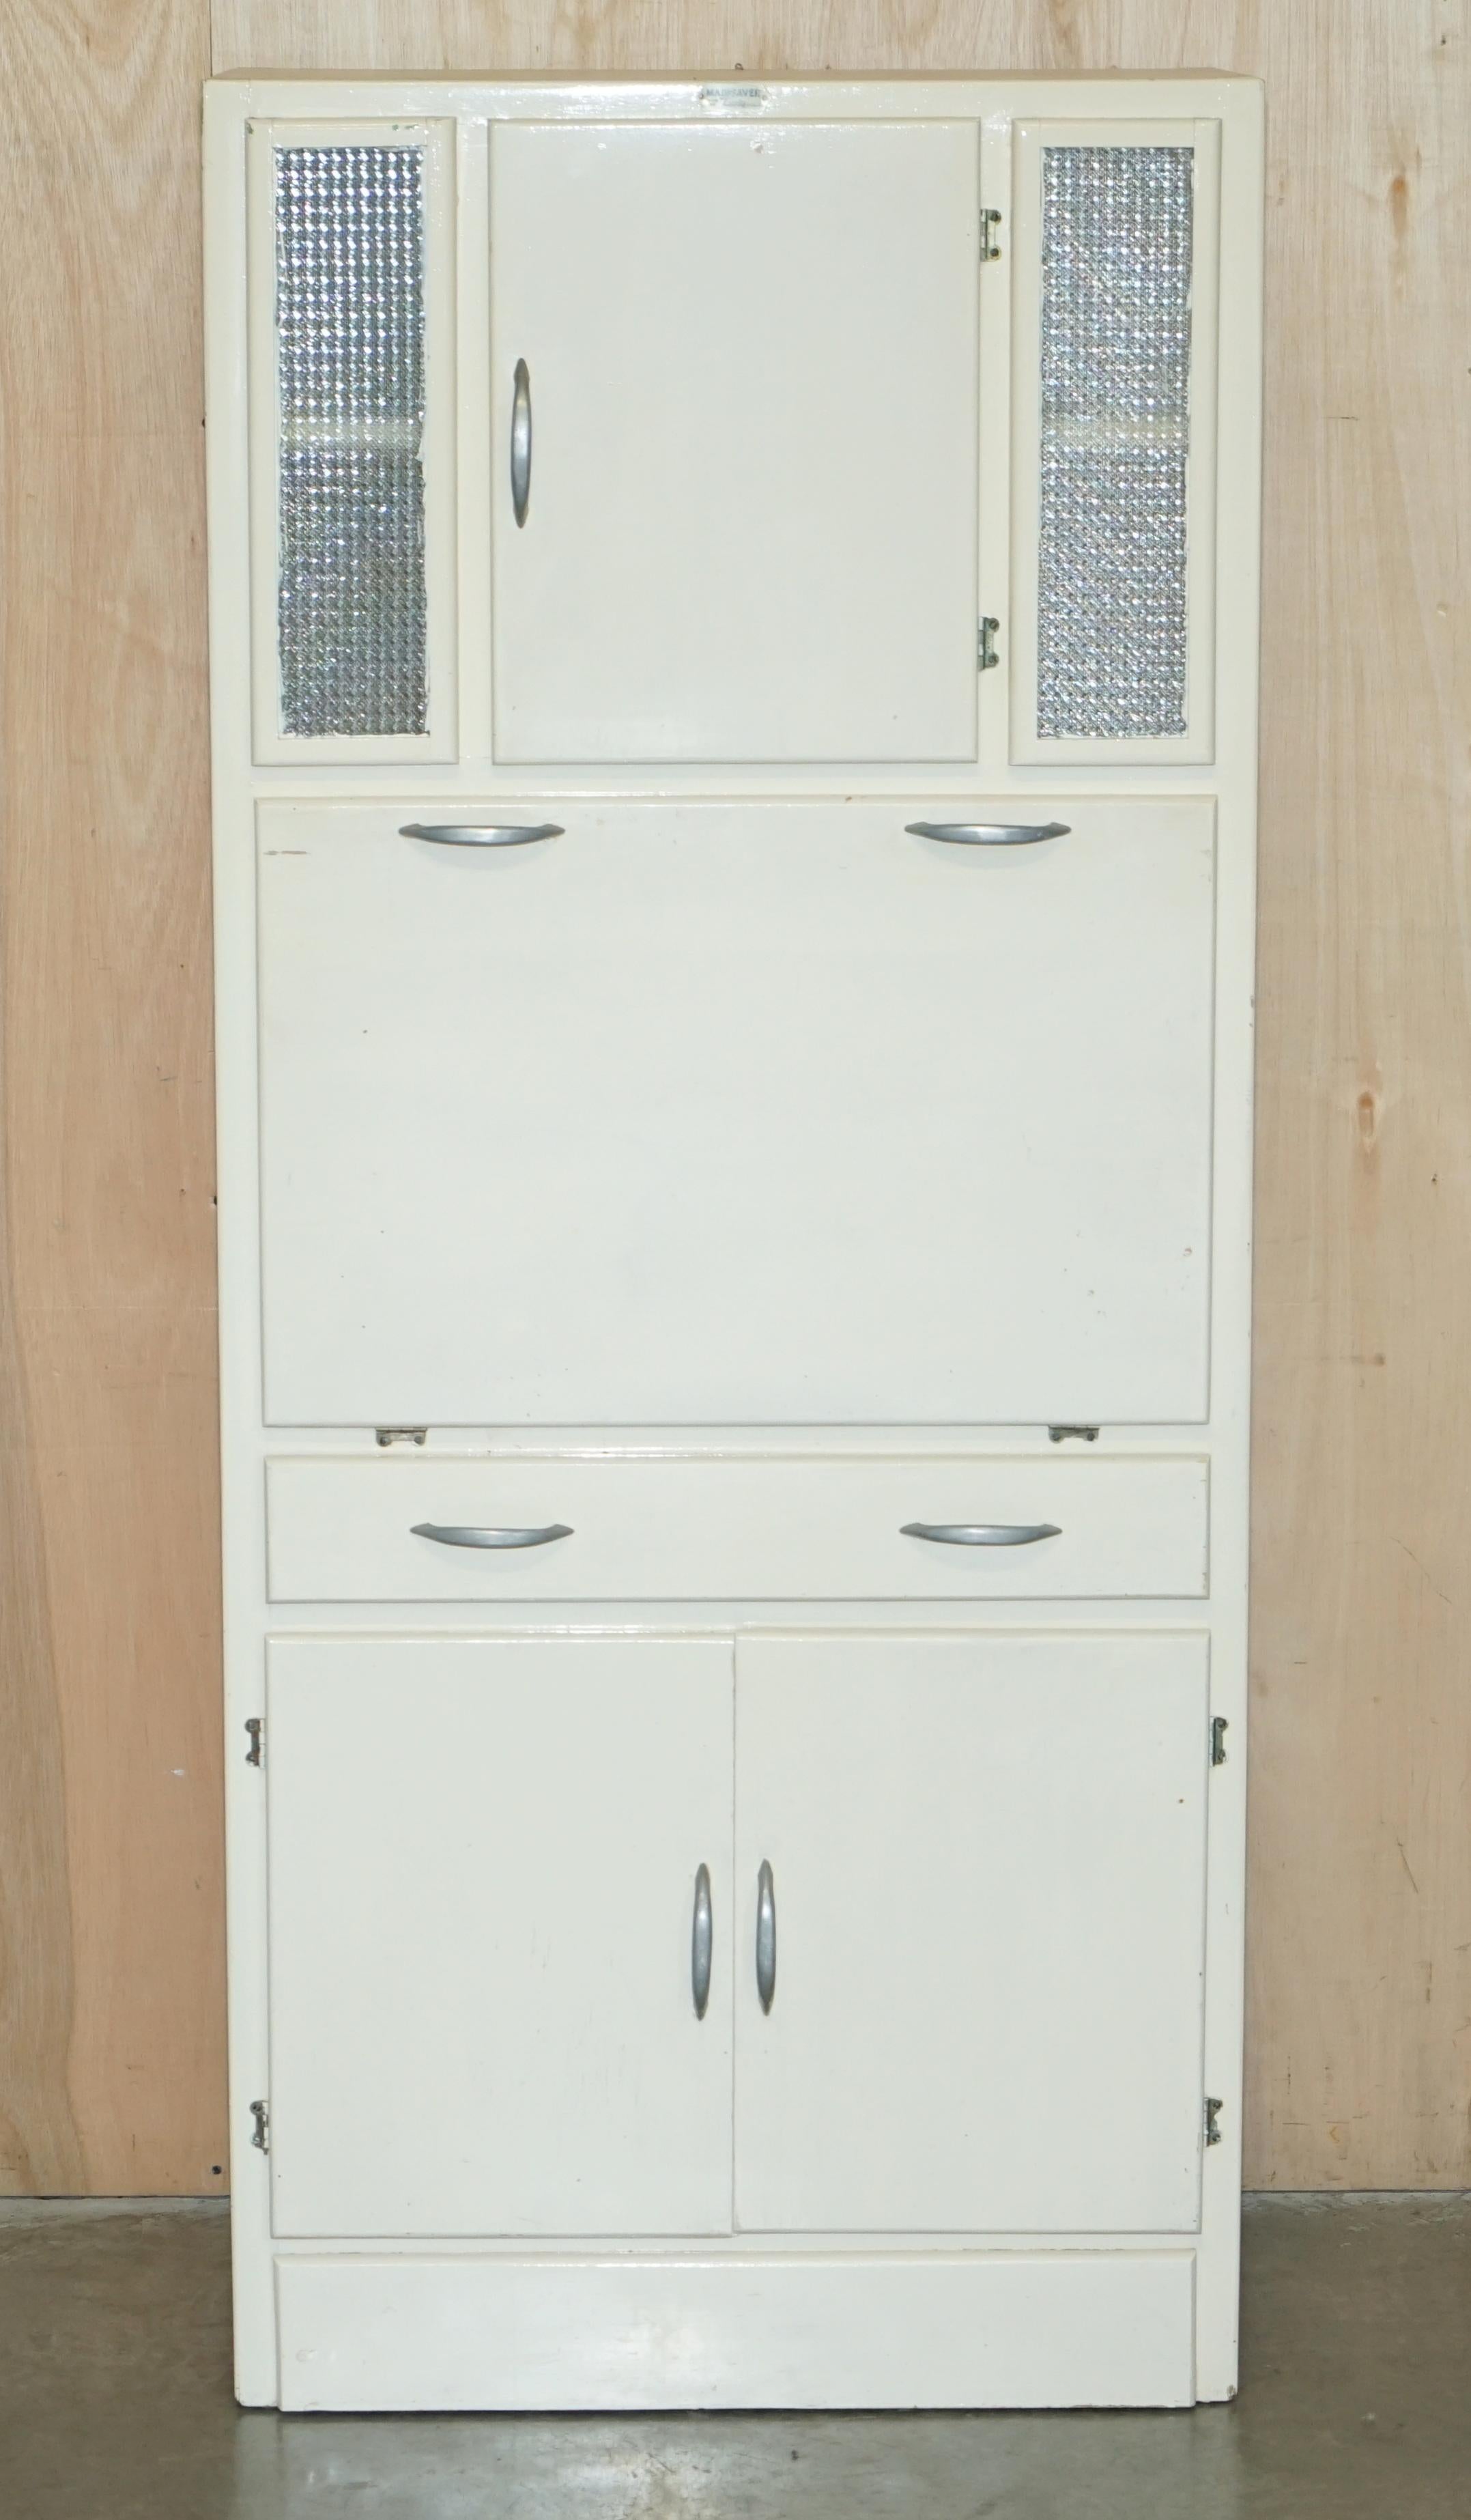 Royal House Antiques

Royal House Antiques is delighted to offer for sale this very cool and totally original Retro Kitchen cabinet circa 1940-1950 by Maidsaver A Lusty product 

Please note the delivery fee listed is just a guide, it covers within